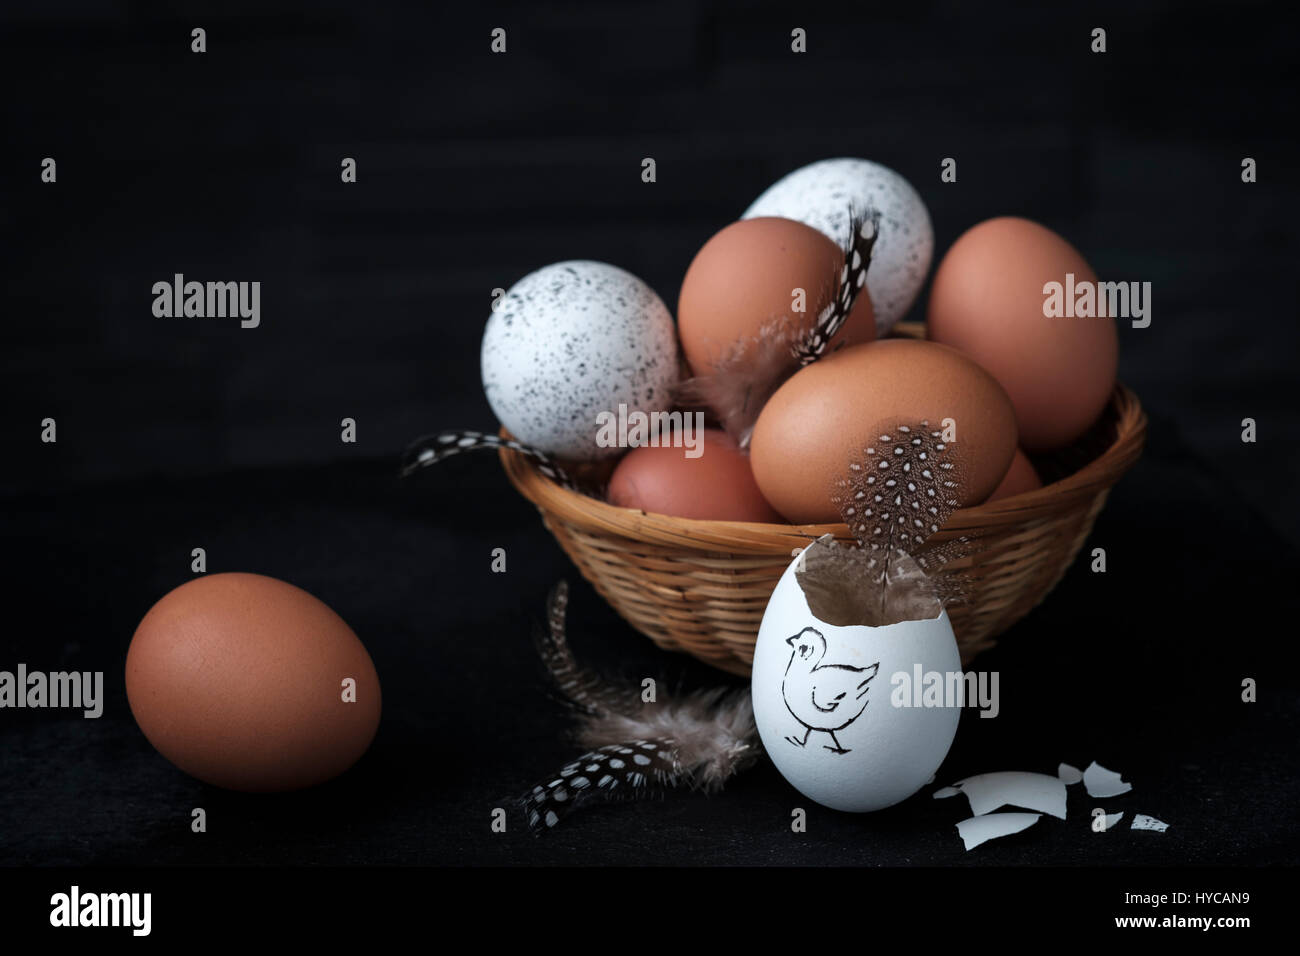 brown and white eggs in a wicker basket with a broken egg in the foreground Stock Photo